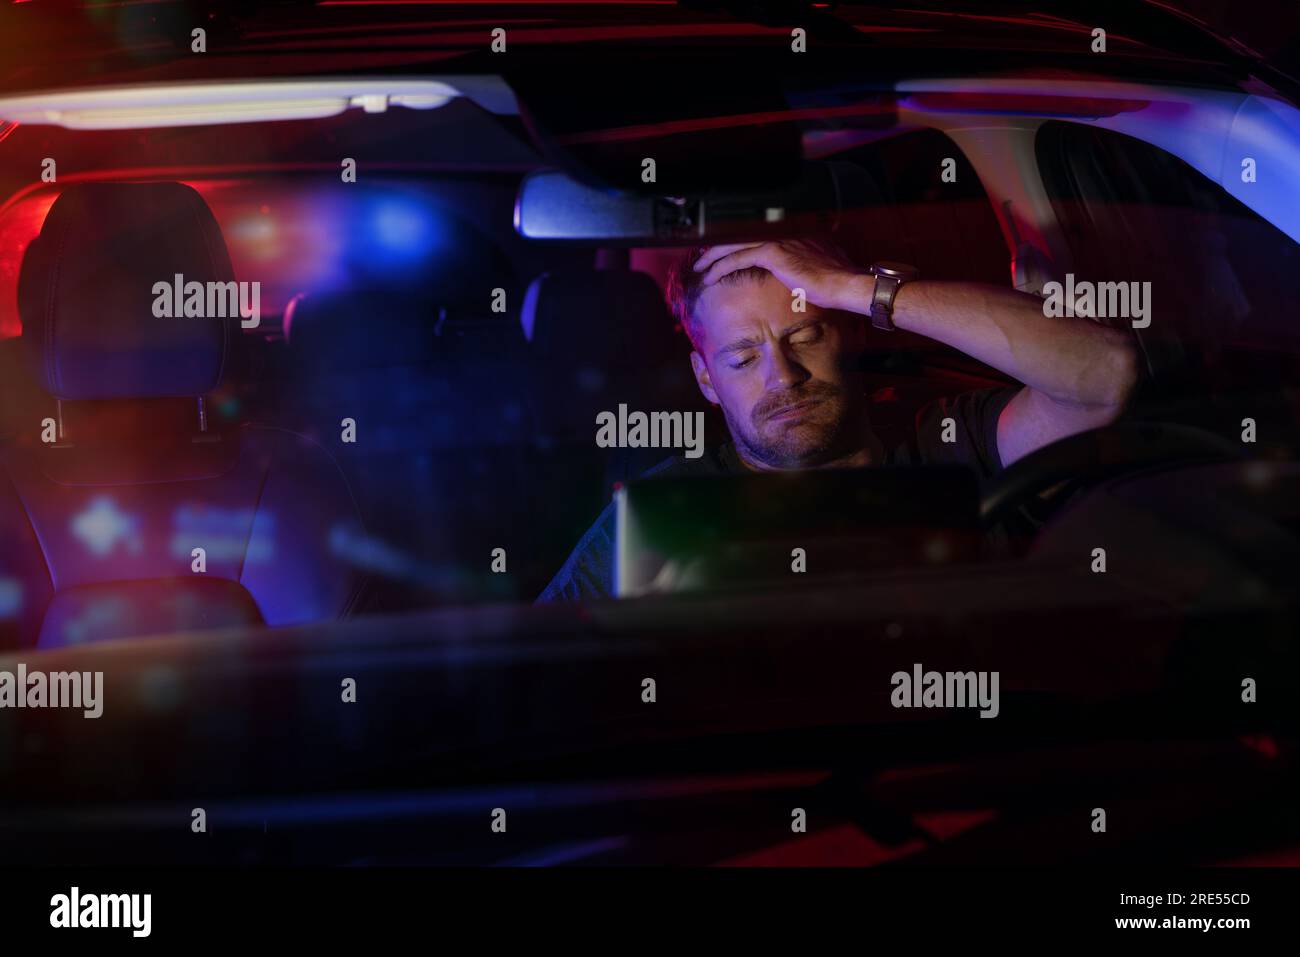 desperate man sitting inside a car after being stopped by police for traffic violations on the road at night Stock Photo